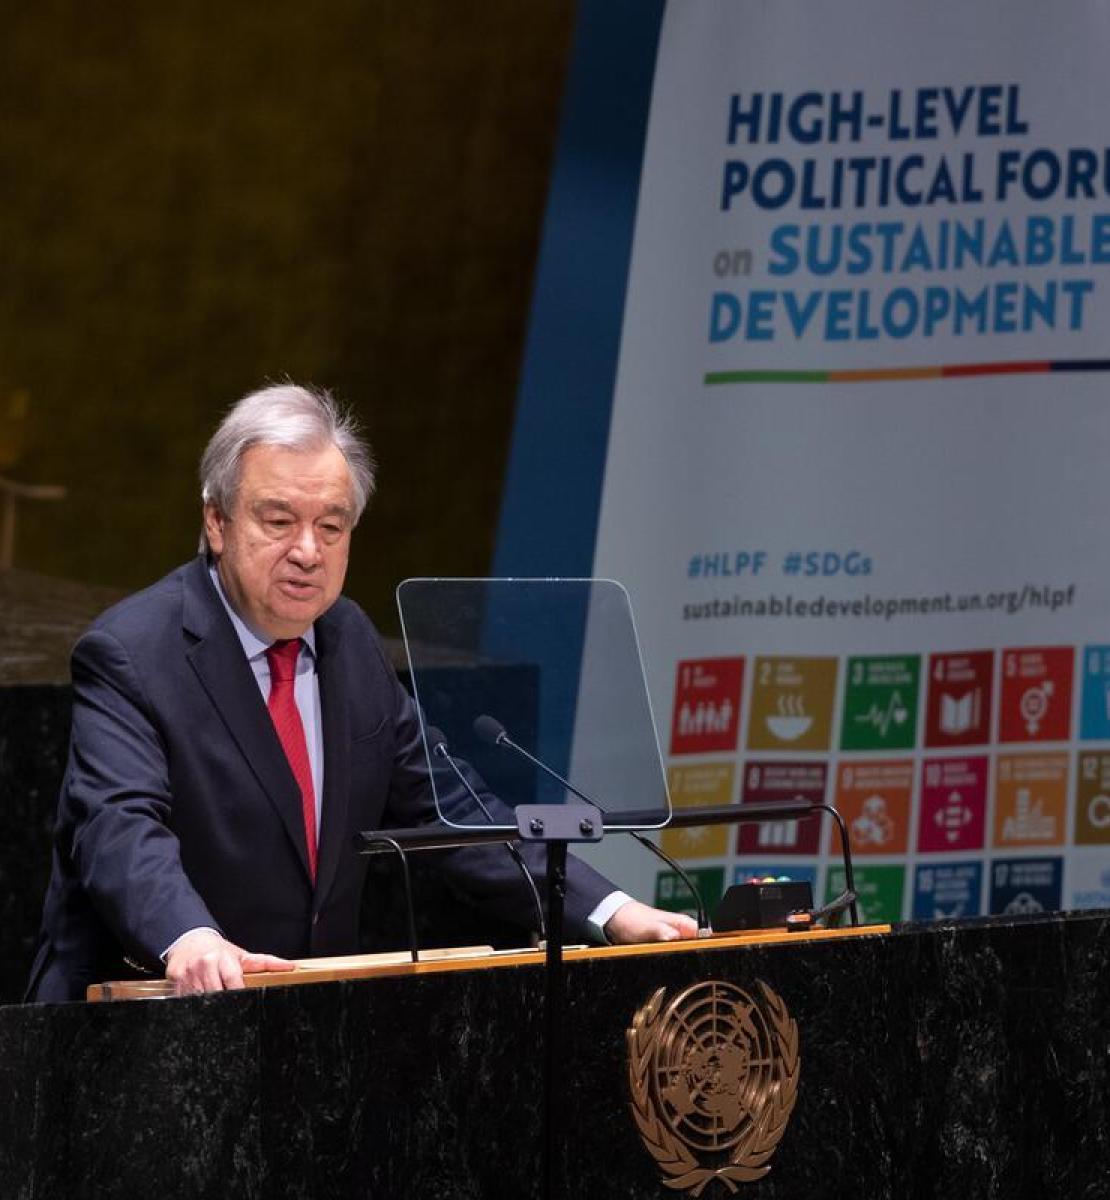 The UN Secretary-General addresses the opening of the high-level political forum on sustainable development